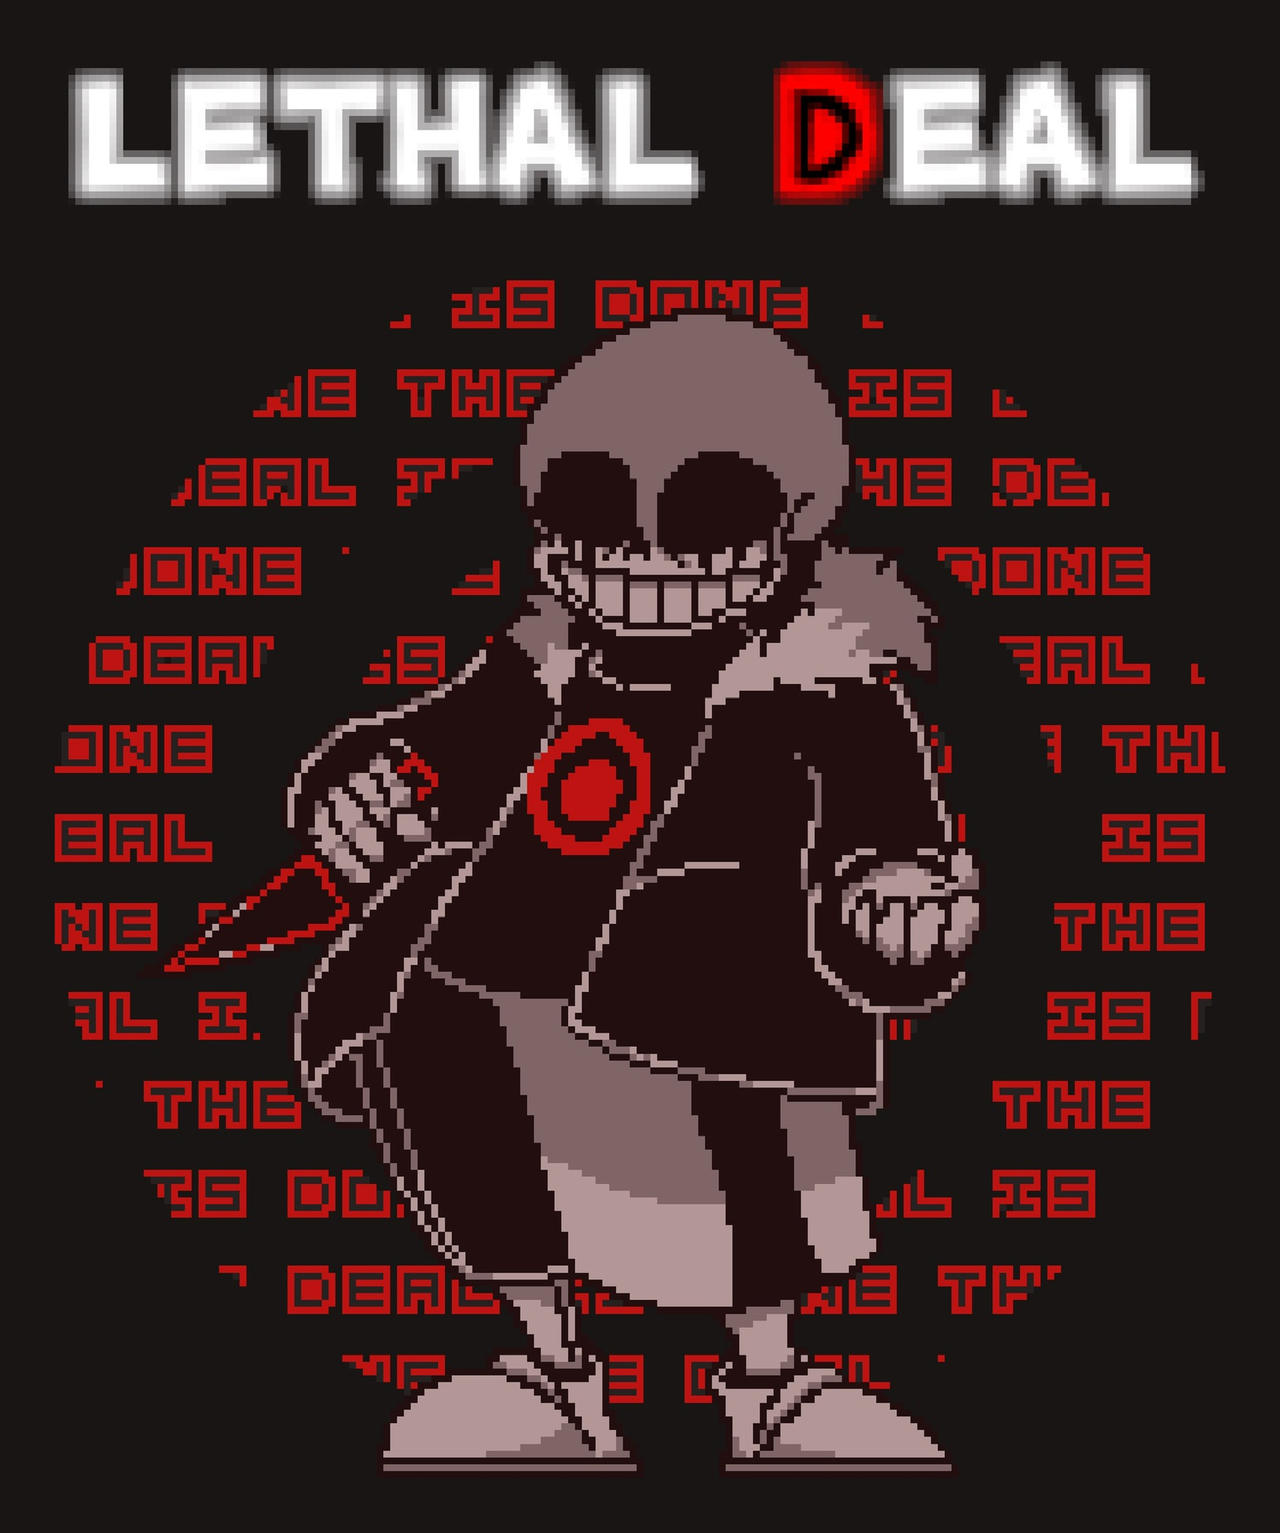 Lethal Deal (Undertale Something New) by Oldcoinmania64 on DeviantArt